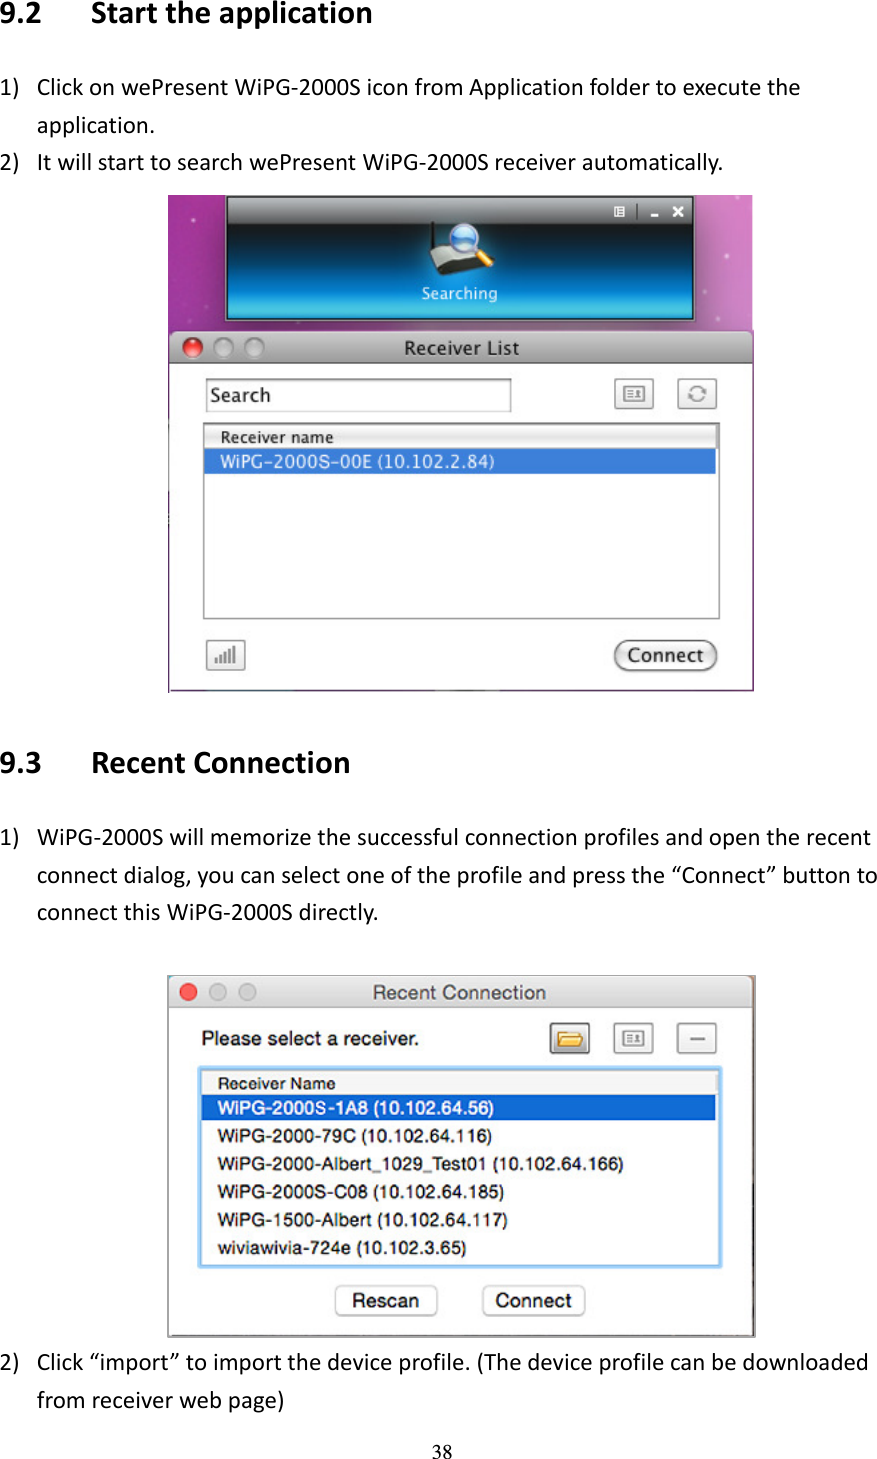   38 9.2   Start the application   1) Click on wePresent WiPG-2000S icon from Application folder to execute the application. 2) It will start to search wePresent WiPG-2000S receiver automatically.    9.3   Recent Connection 1) WiPG-2000S will memorize the successful connection profiles and open the recent connect dialog, you can select one of the profile and press the “Connect” button to connect this WiPG-2000S directly.     2) Click “import” to import the device profile. (The device profile can be downloaded from receiver web page) 